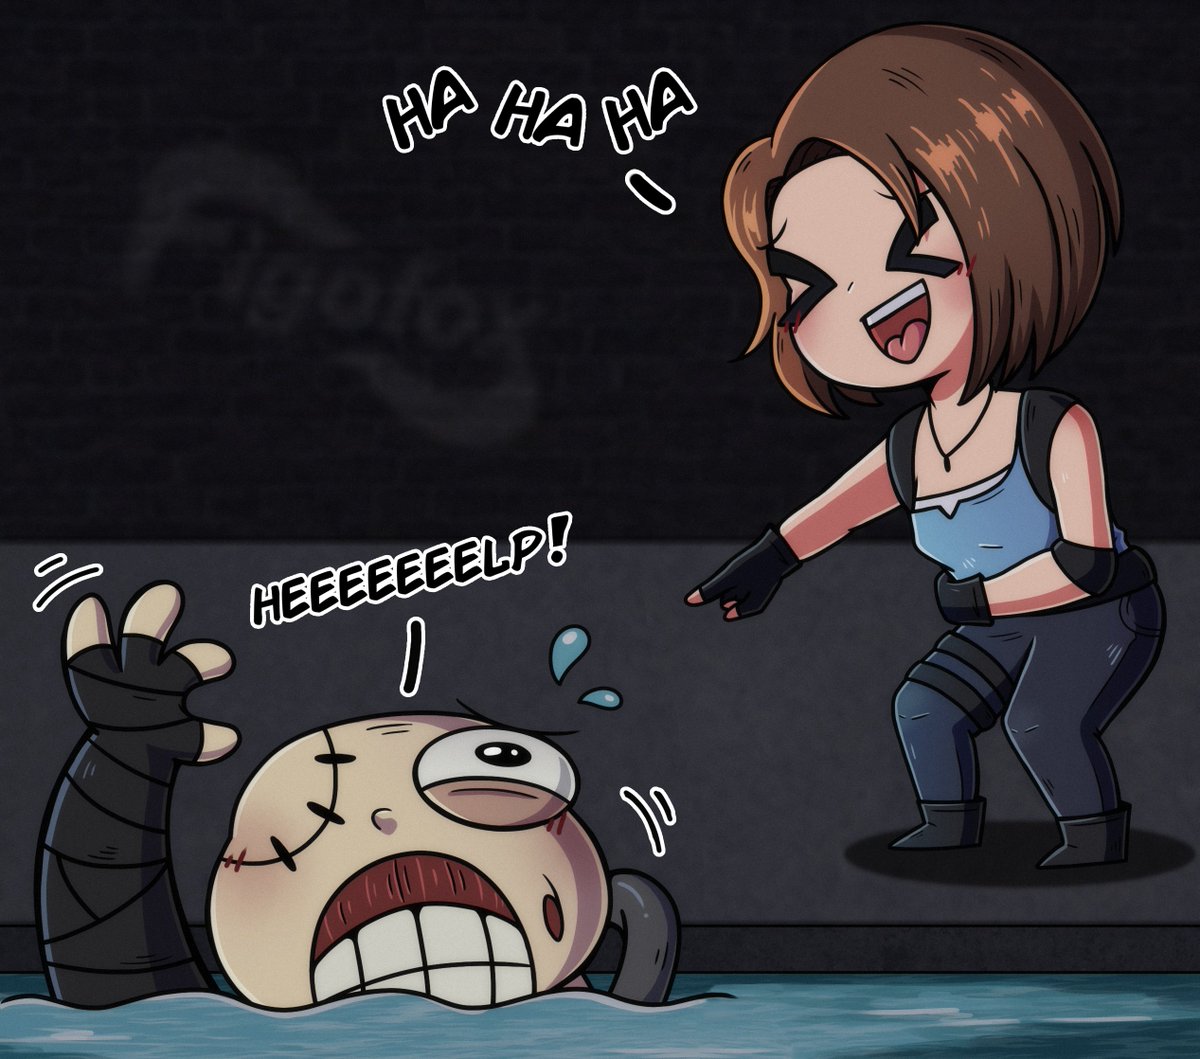 Happy 4th year anniversary to Resident Evil 3 Remake!🎉🥳
Here's on old drawing to celebrate🙌

#REBHFun #ResidentEvil #ResidentEvil3 #ResidentEvil3Remake #JillValentine